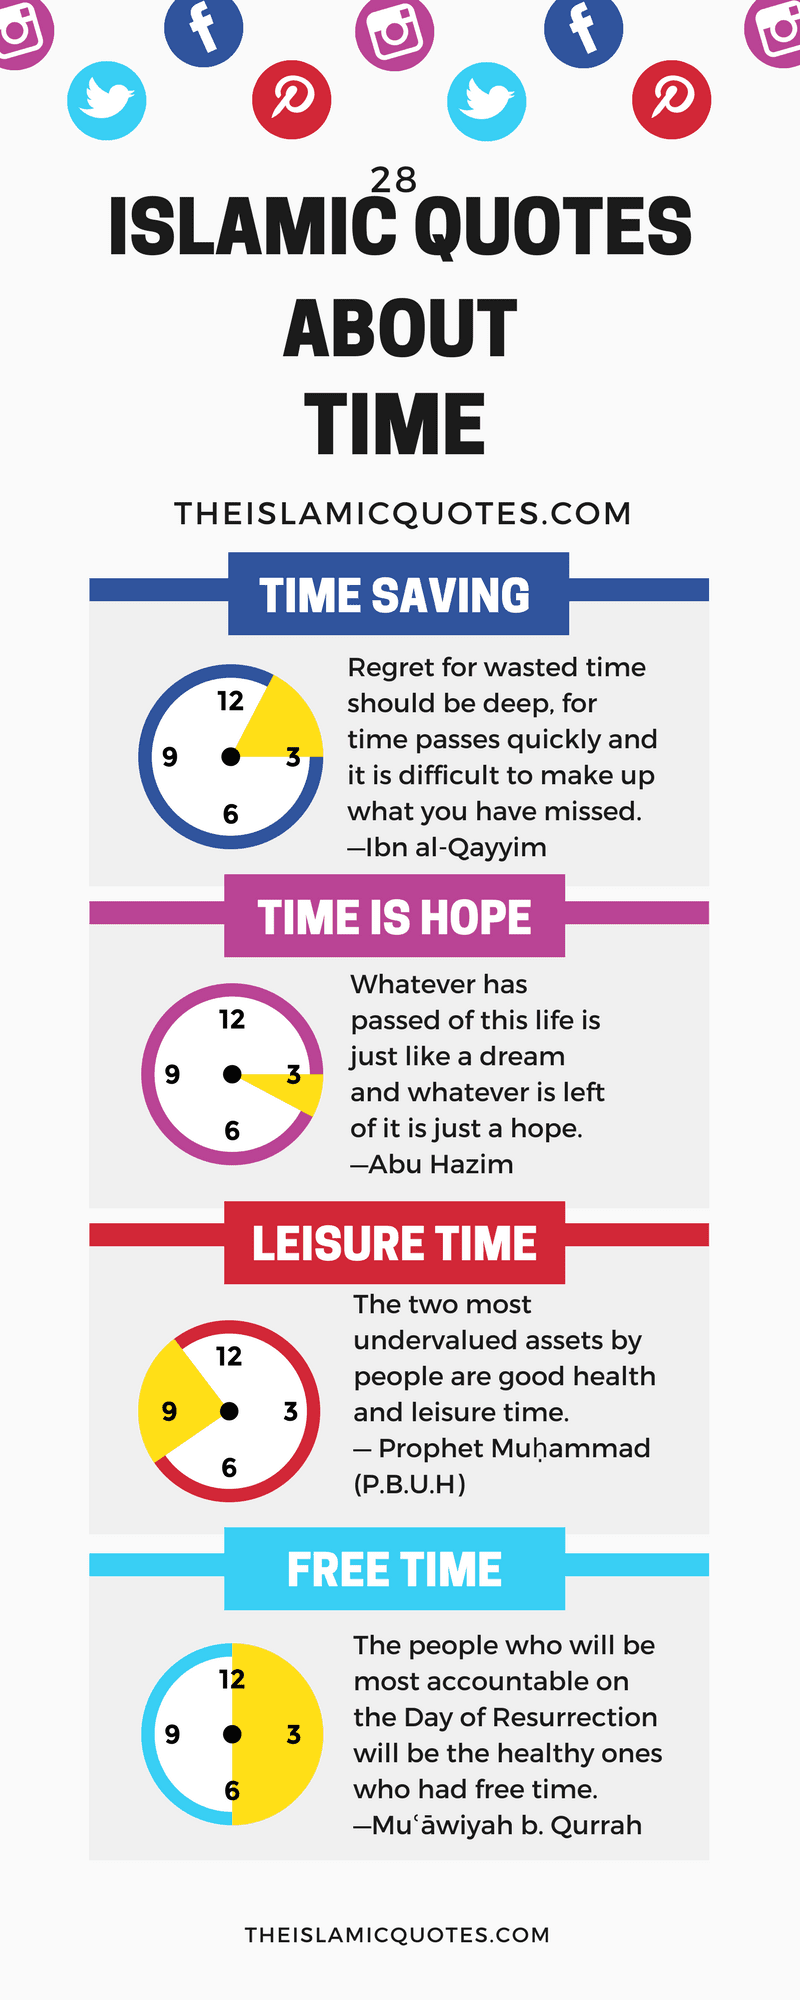 Islamic quotes about time management (1)